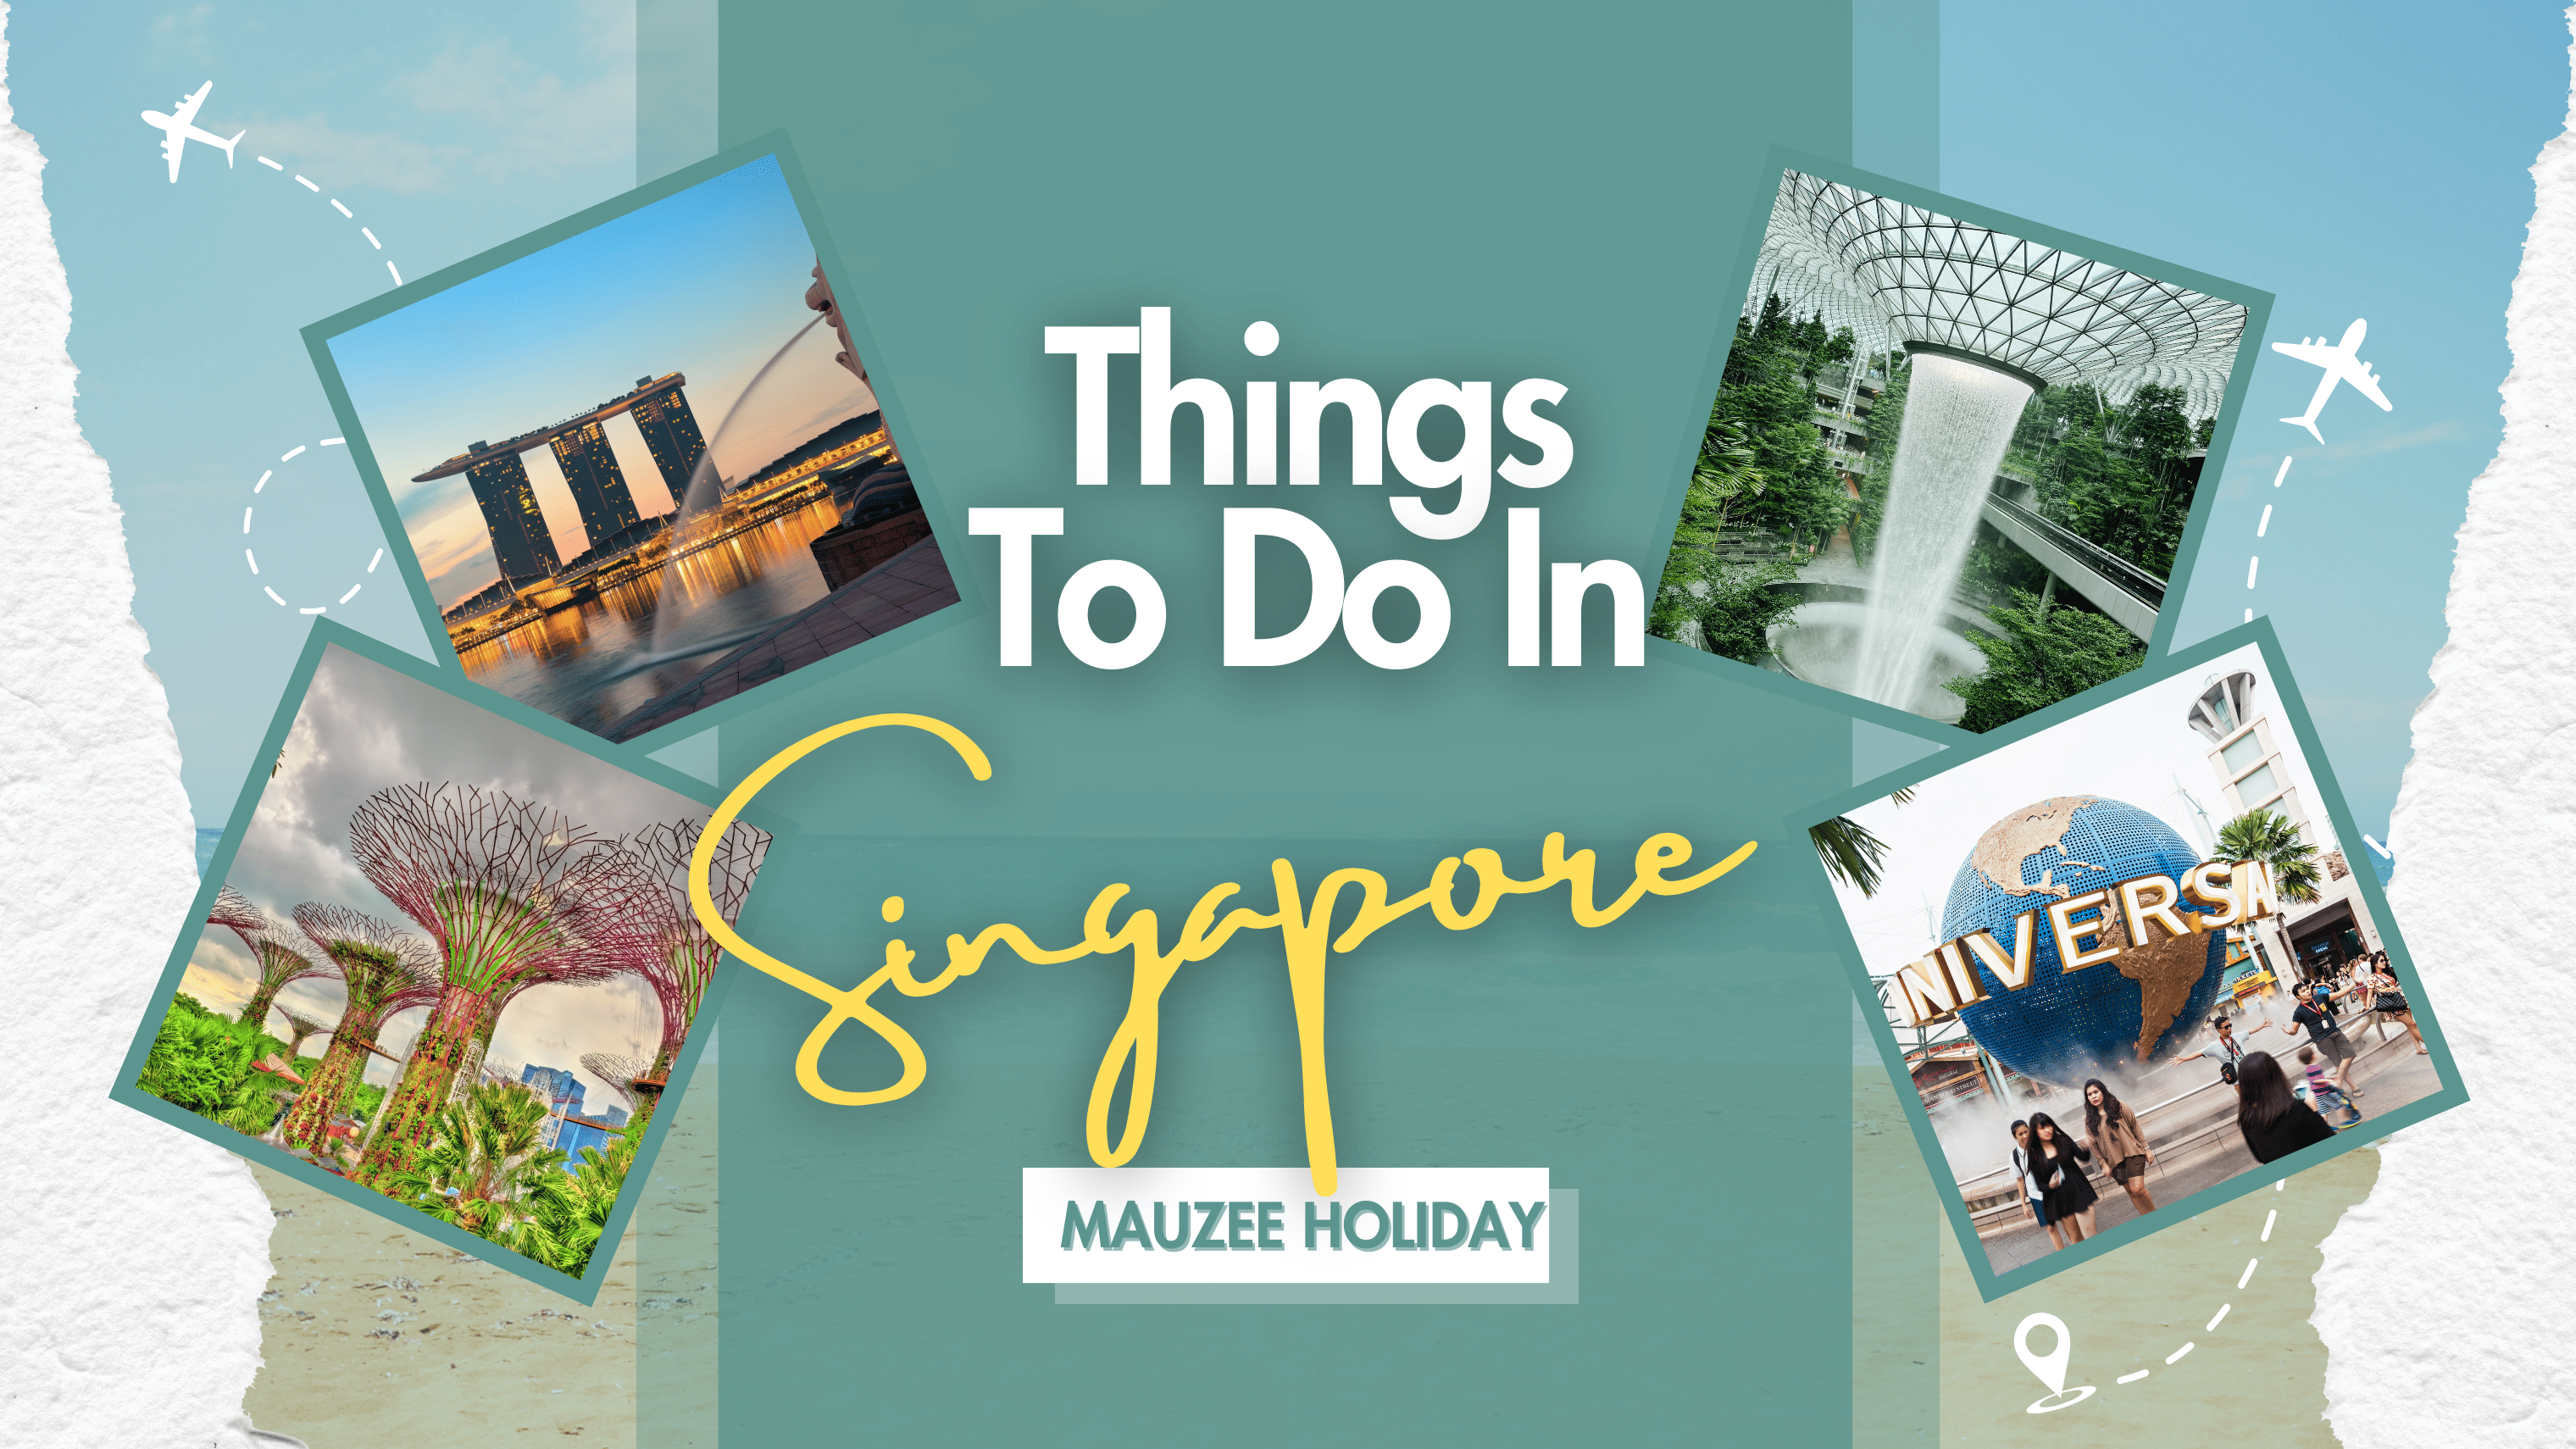 Singapore Tour Packages: Mauzee Holiday's Urban Adventures